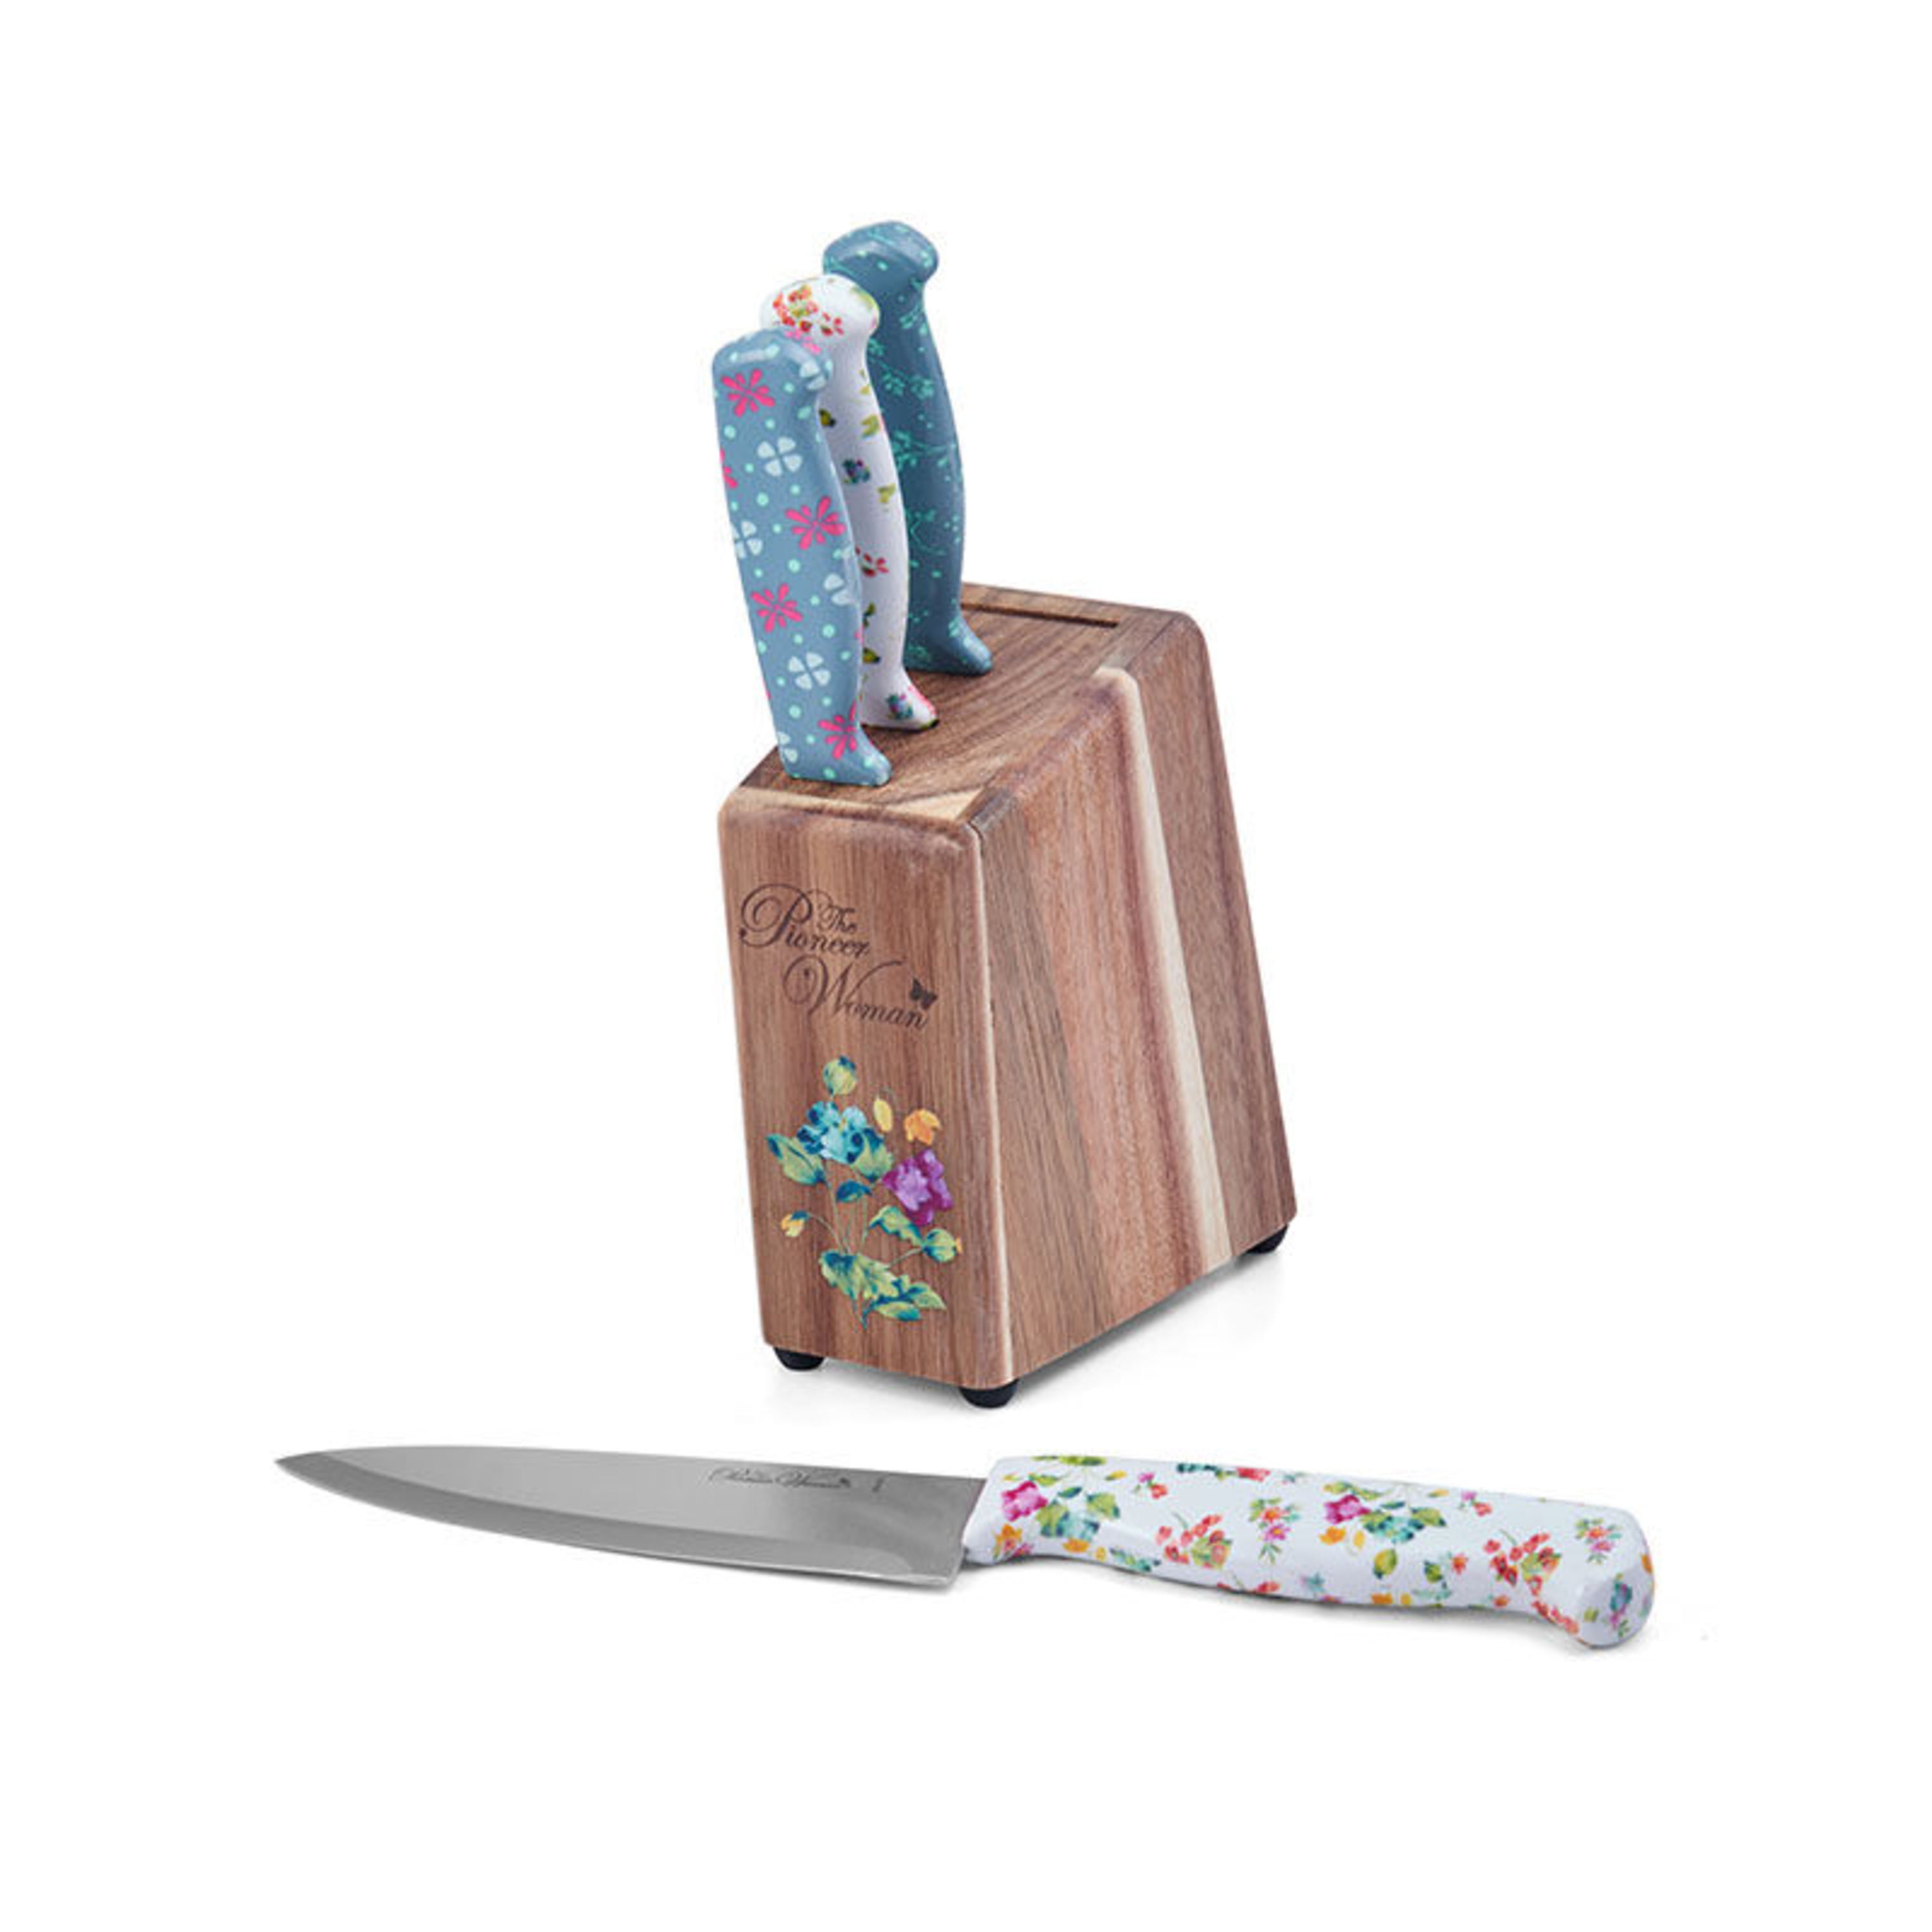 The Pioneer Woman Knife Sharpener, Blooming Bouquet - Knife